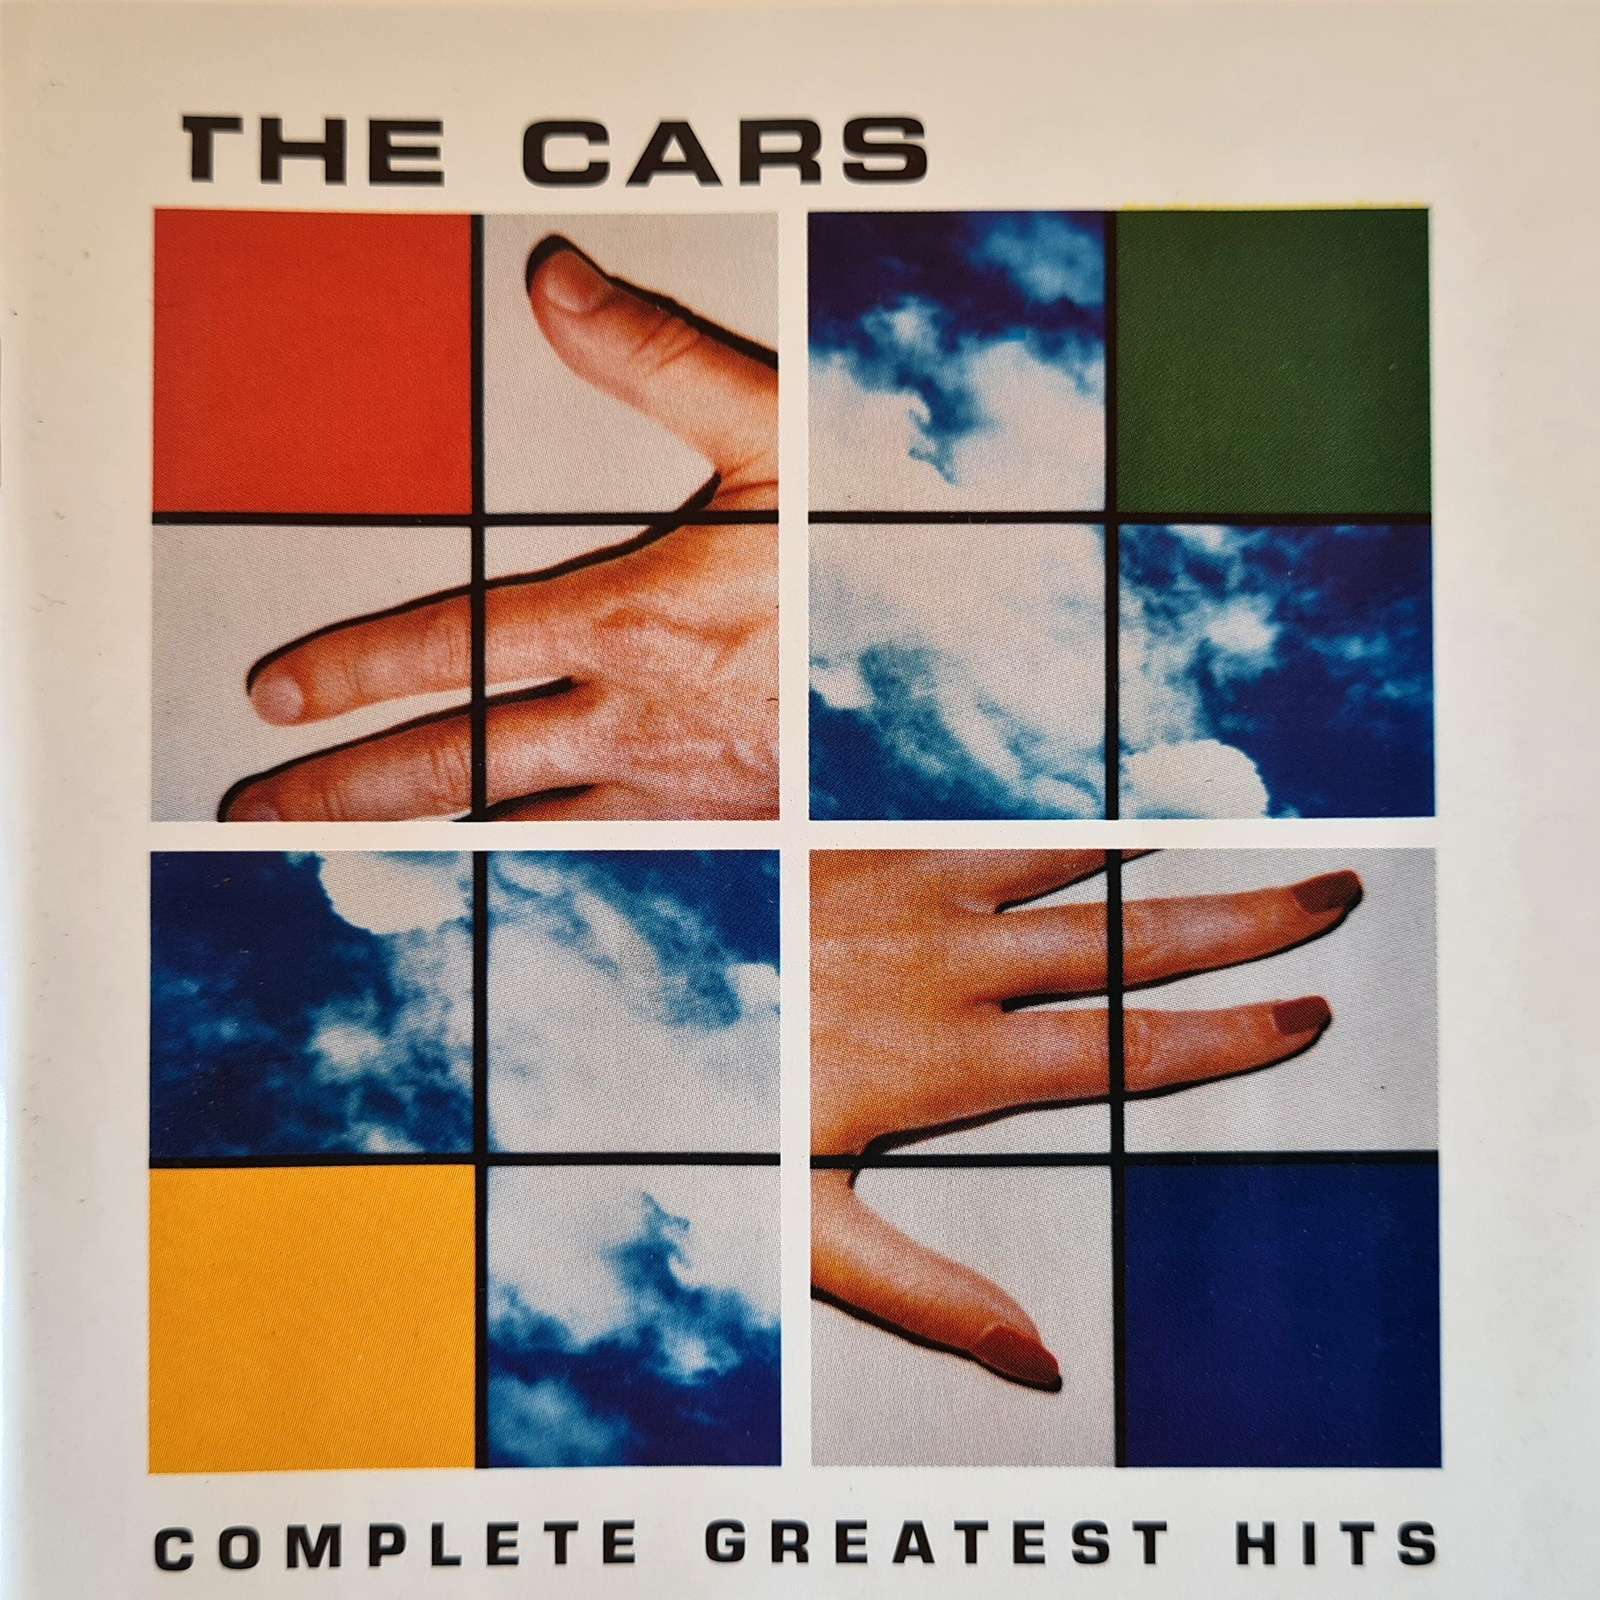 The Cars - Complete Greatest Hits (CD)